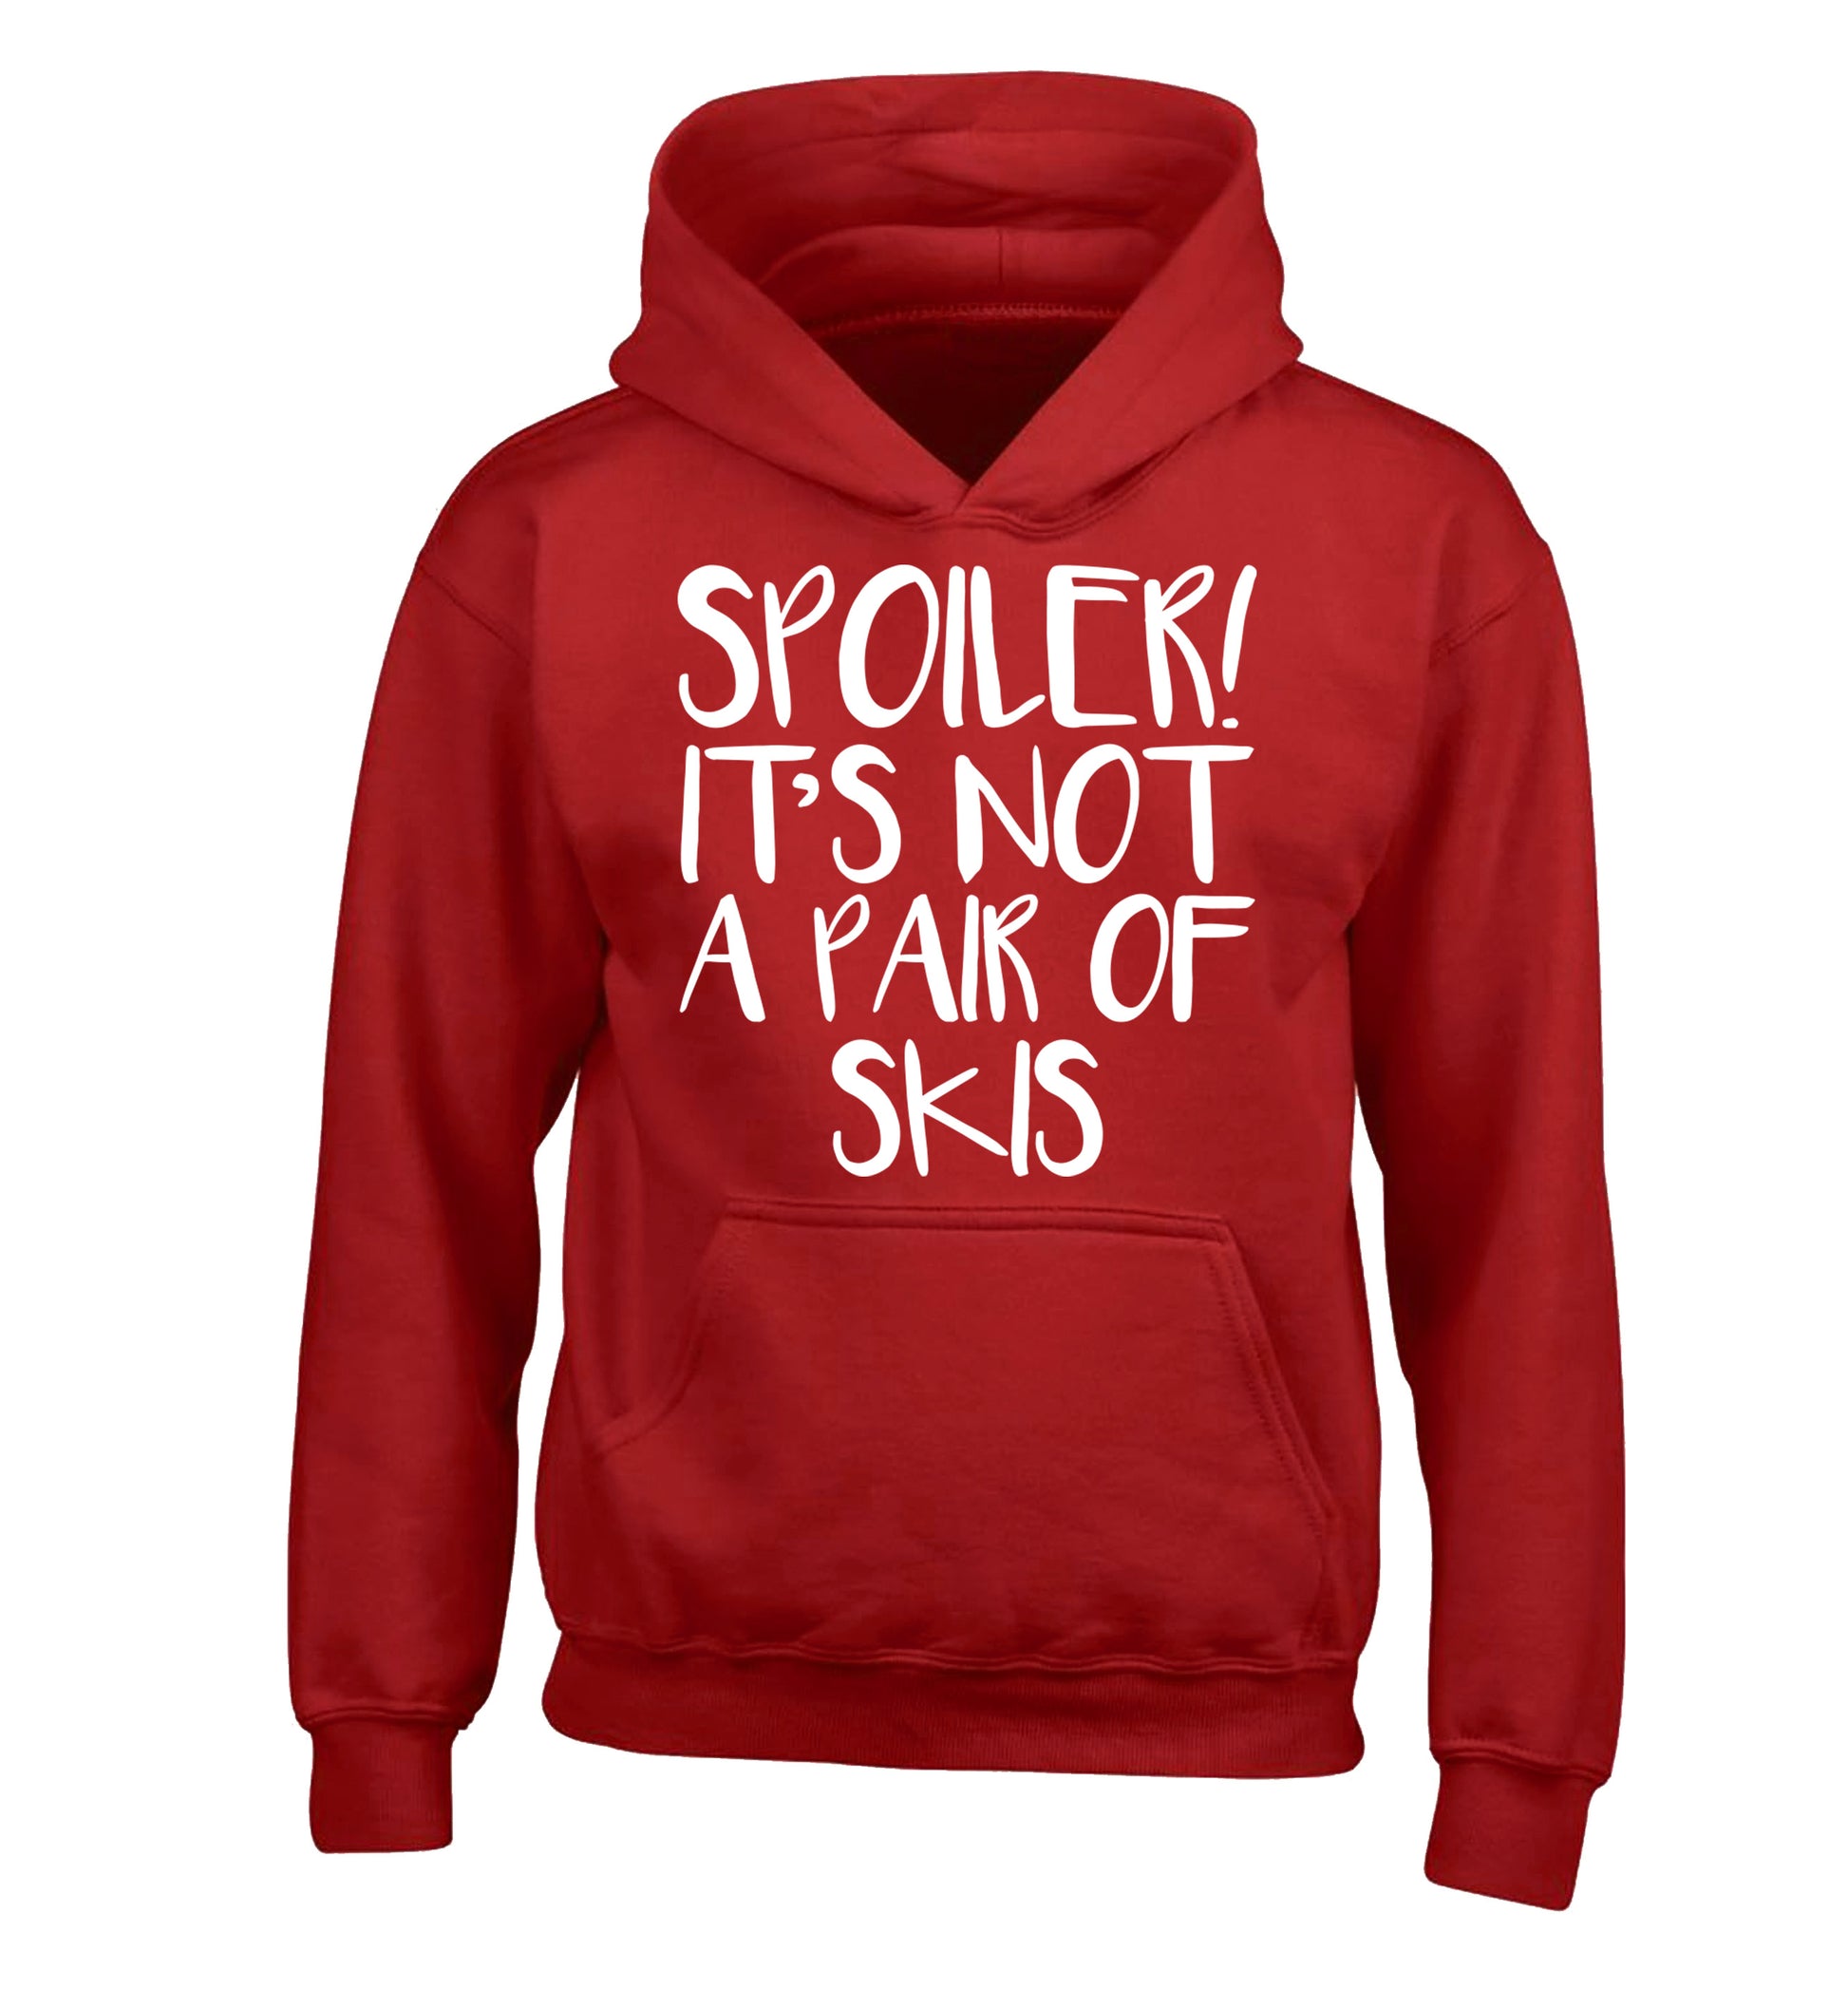 Spoiler it's not a pair of skis children's red hoodie 12-13 Years